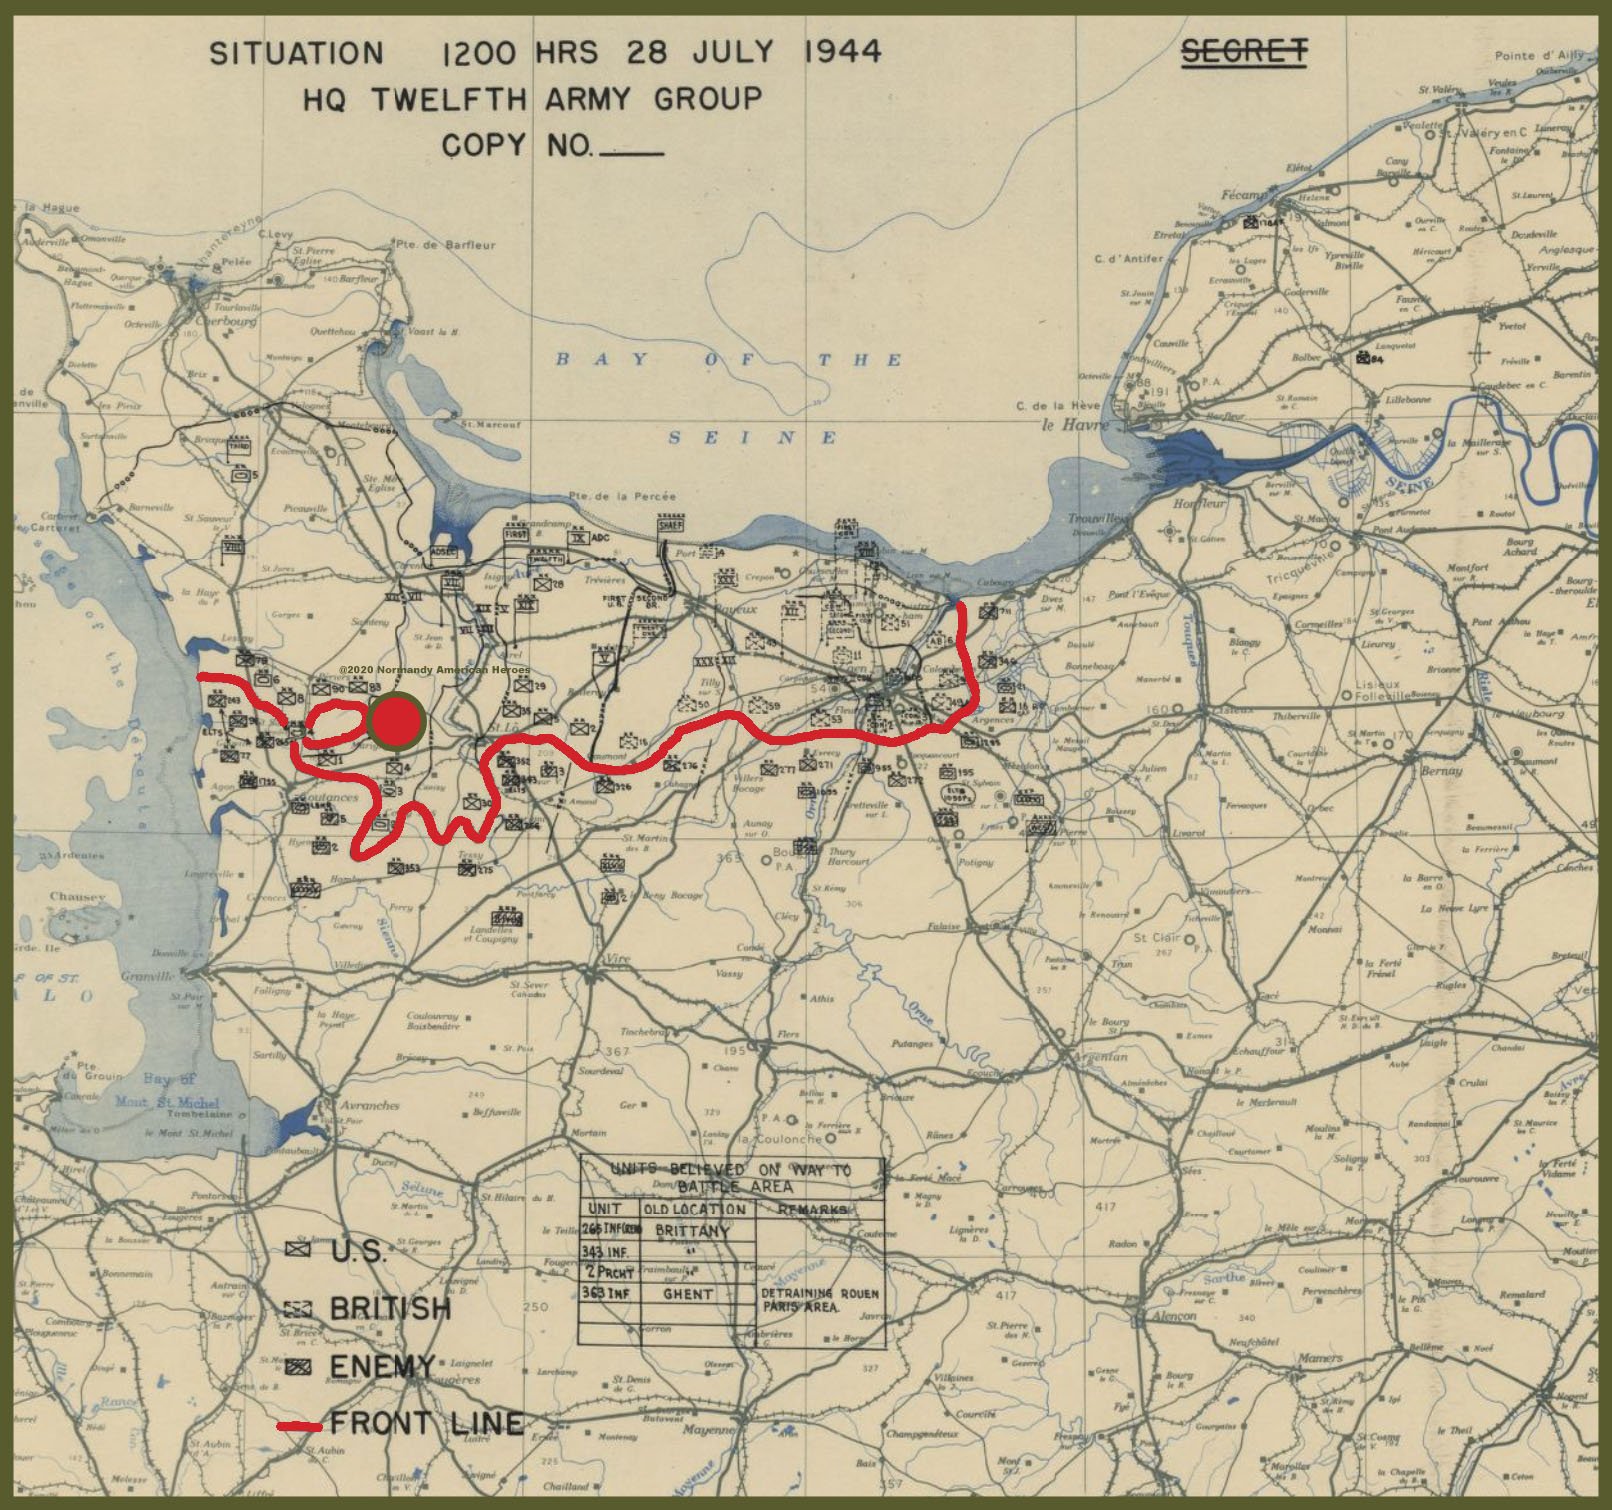 HQ Twelfth Army Group situation map 28 July 1944